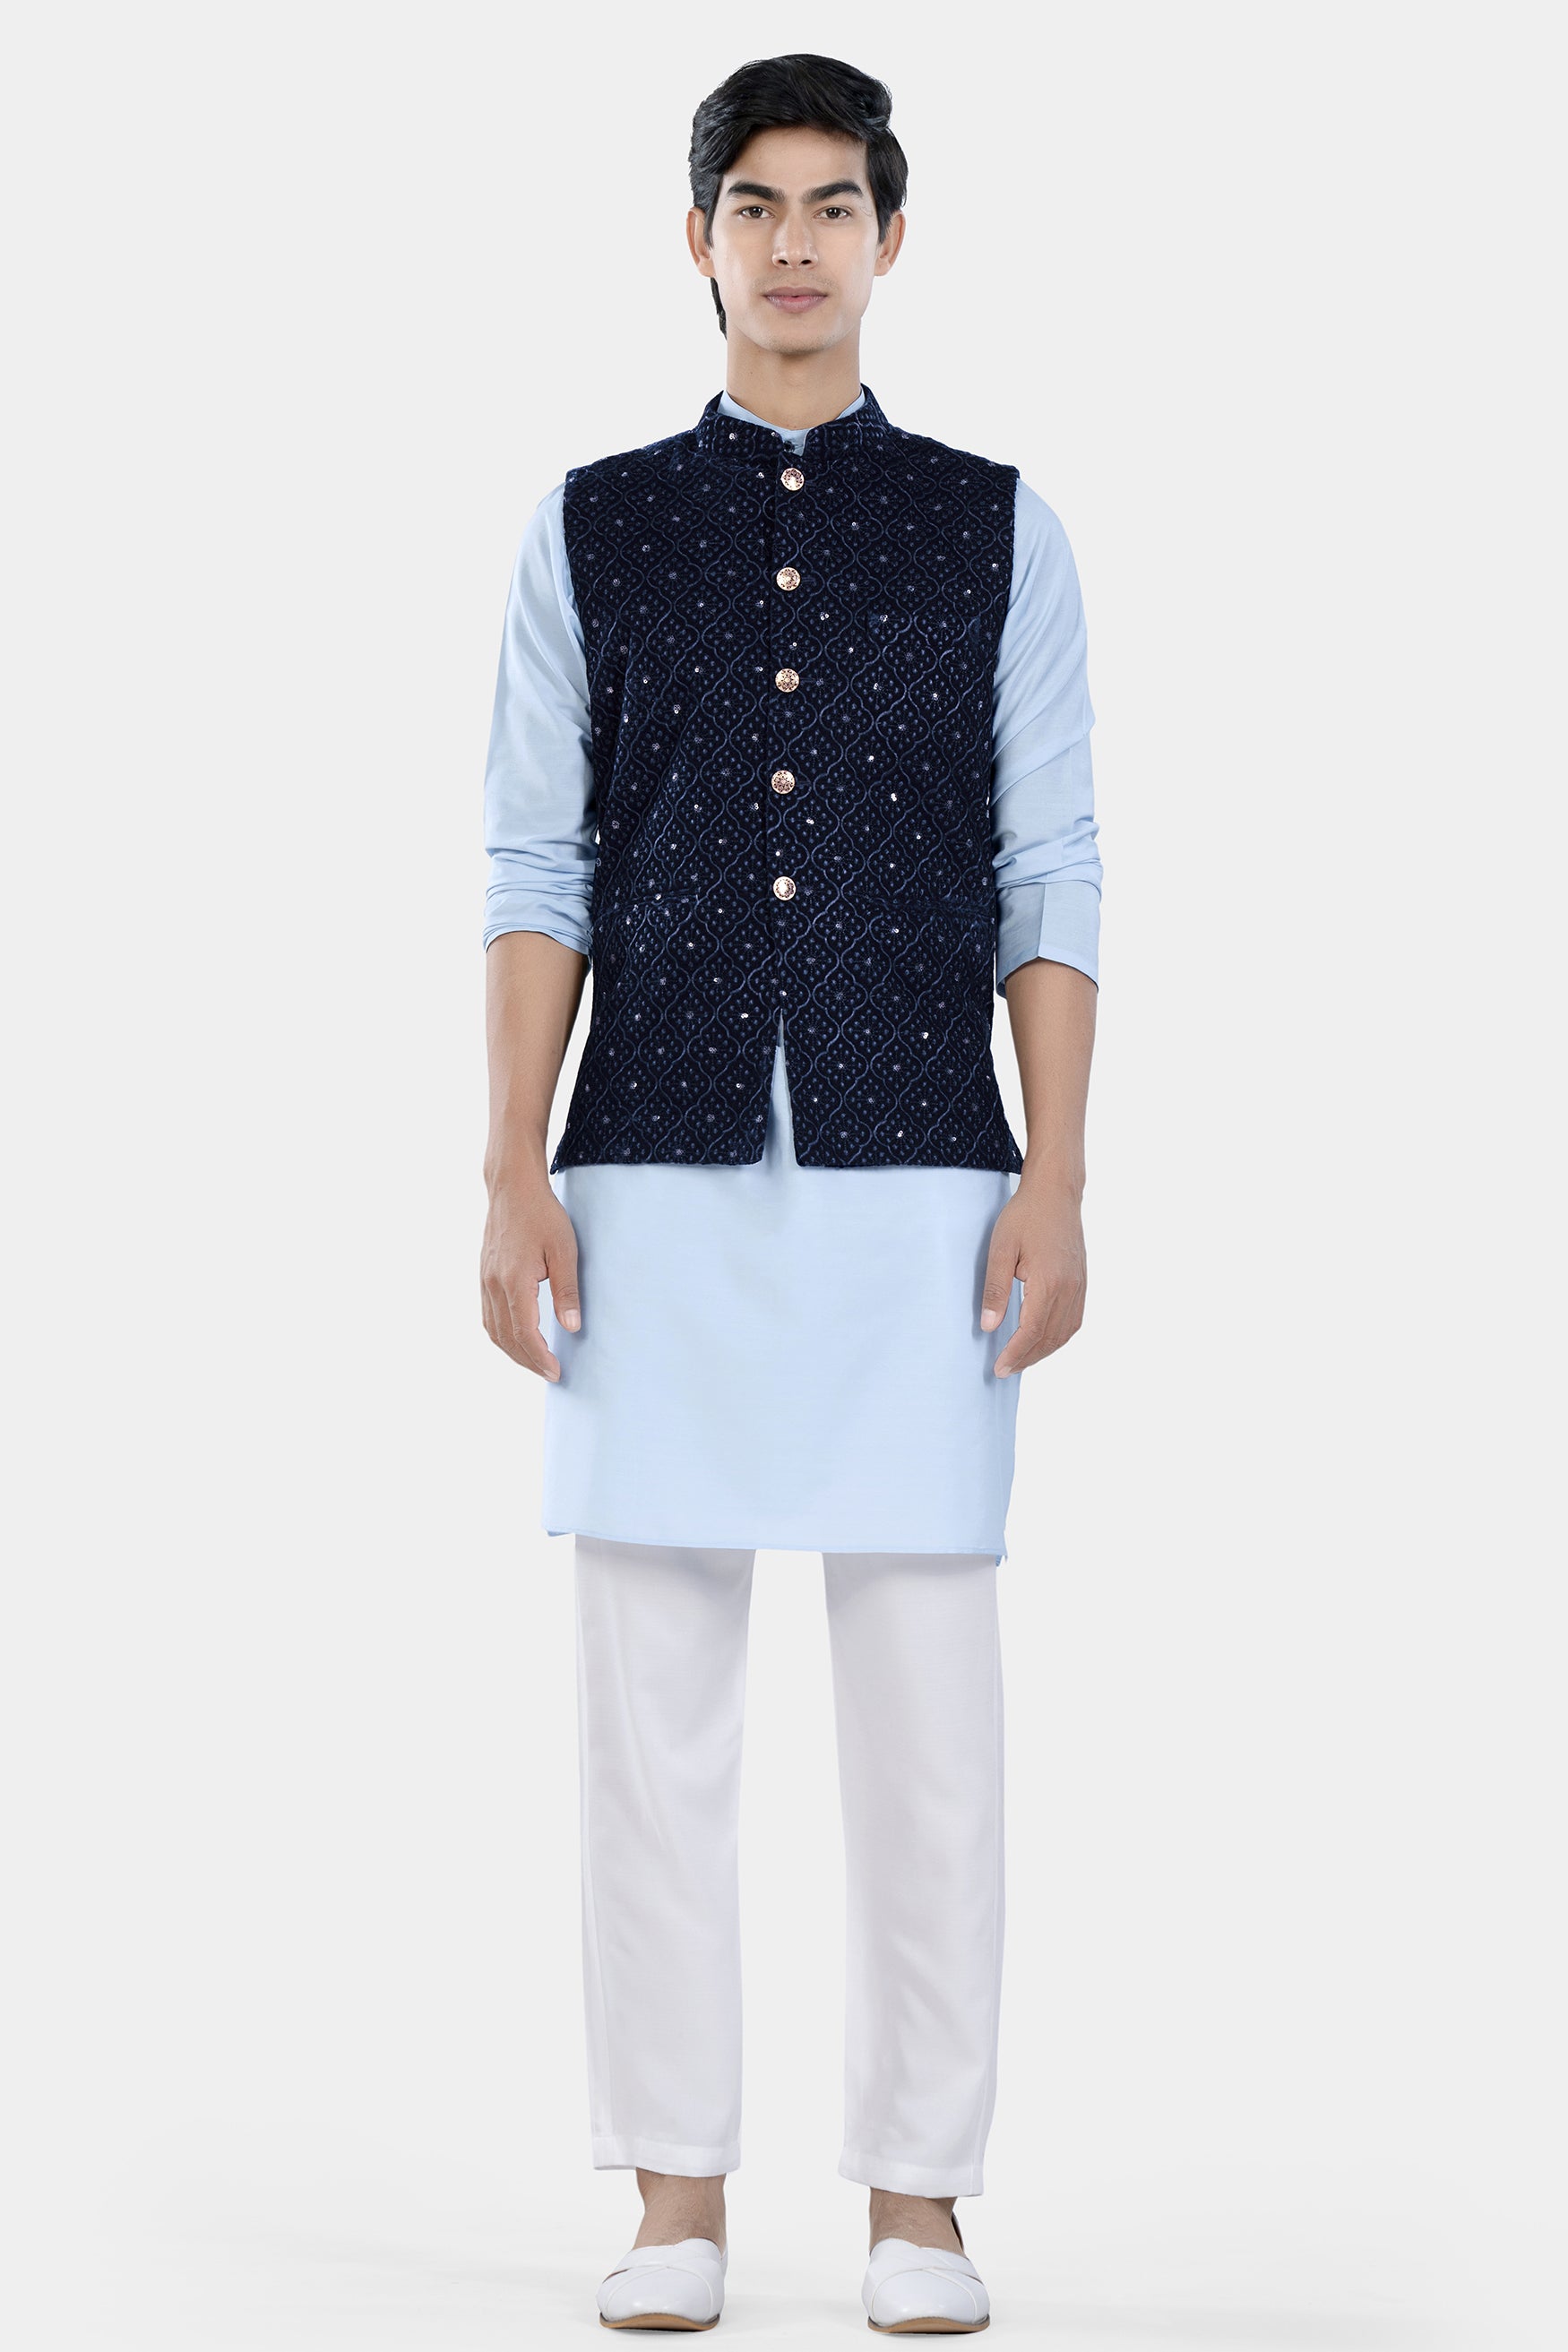 Haiti and Astros Blue Moroccan Thread and Sequin Embroidered Nehru Jacket